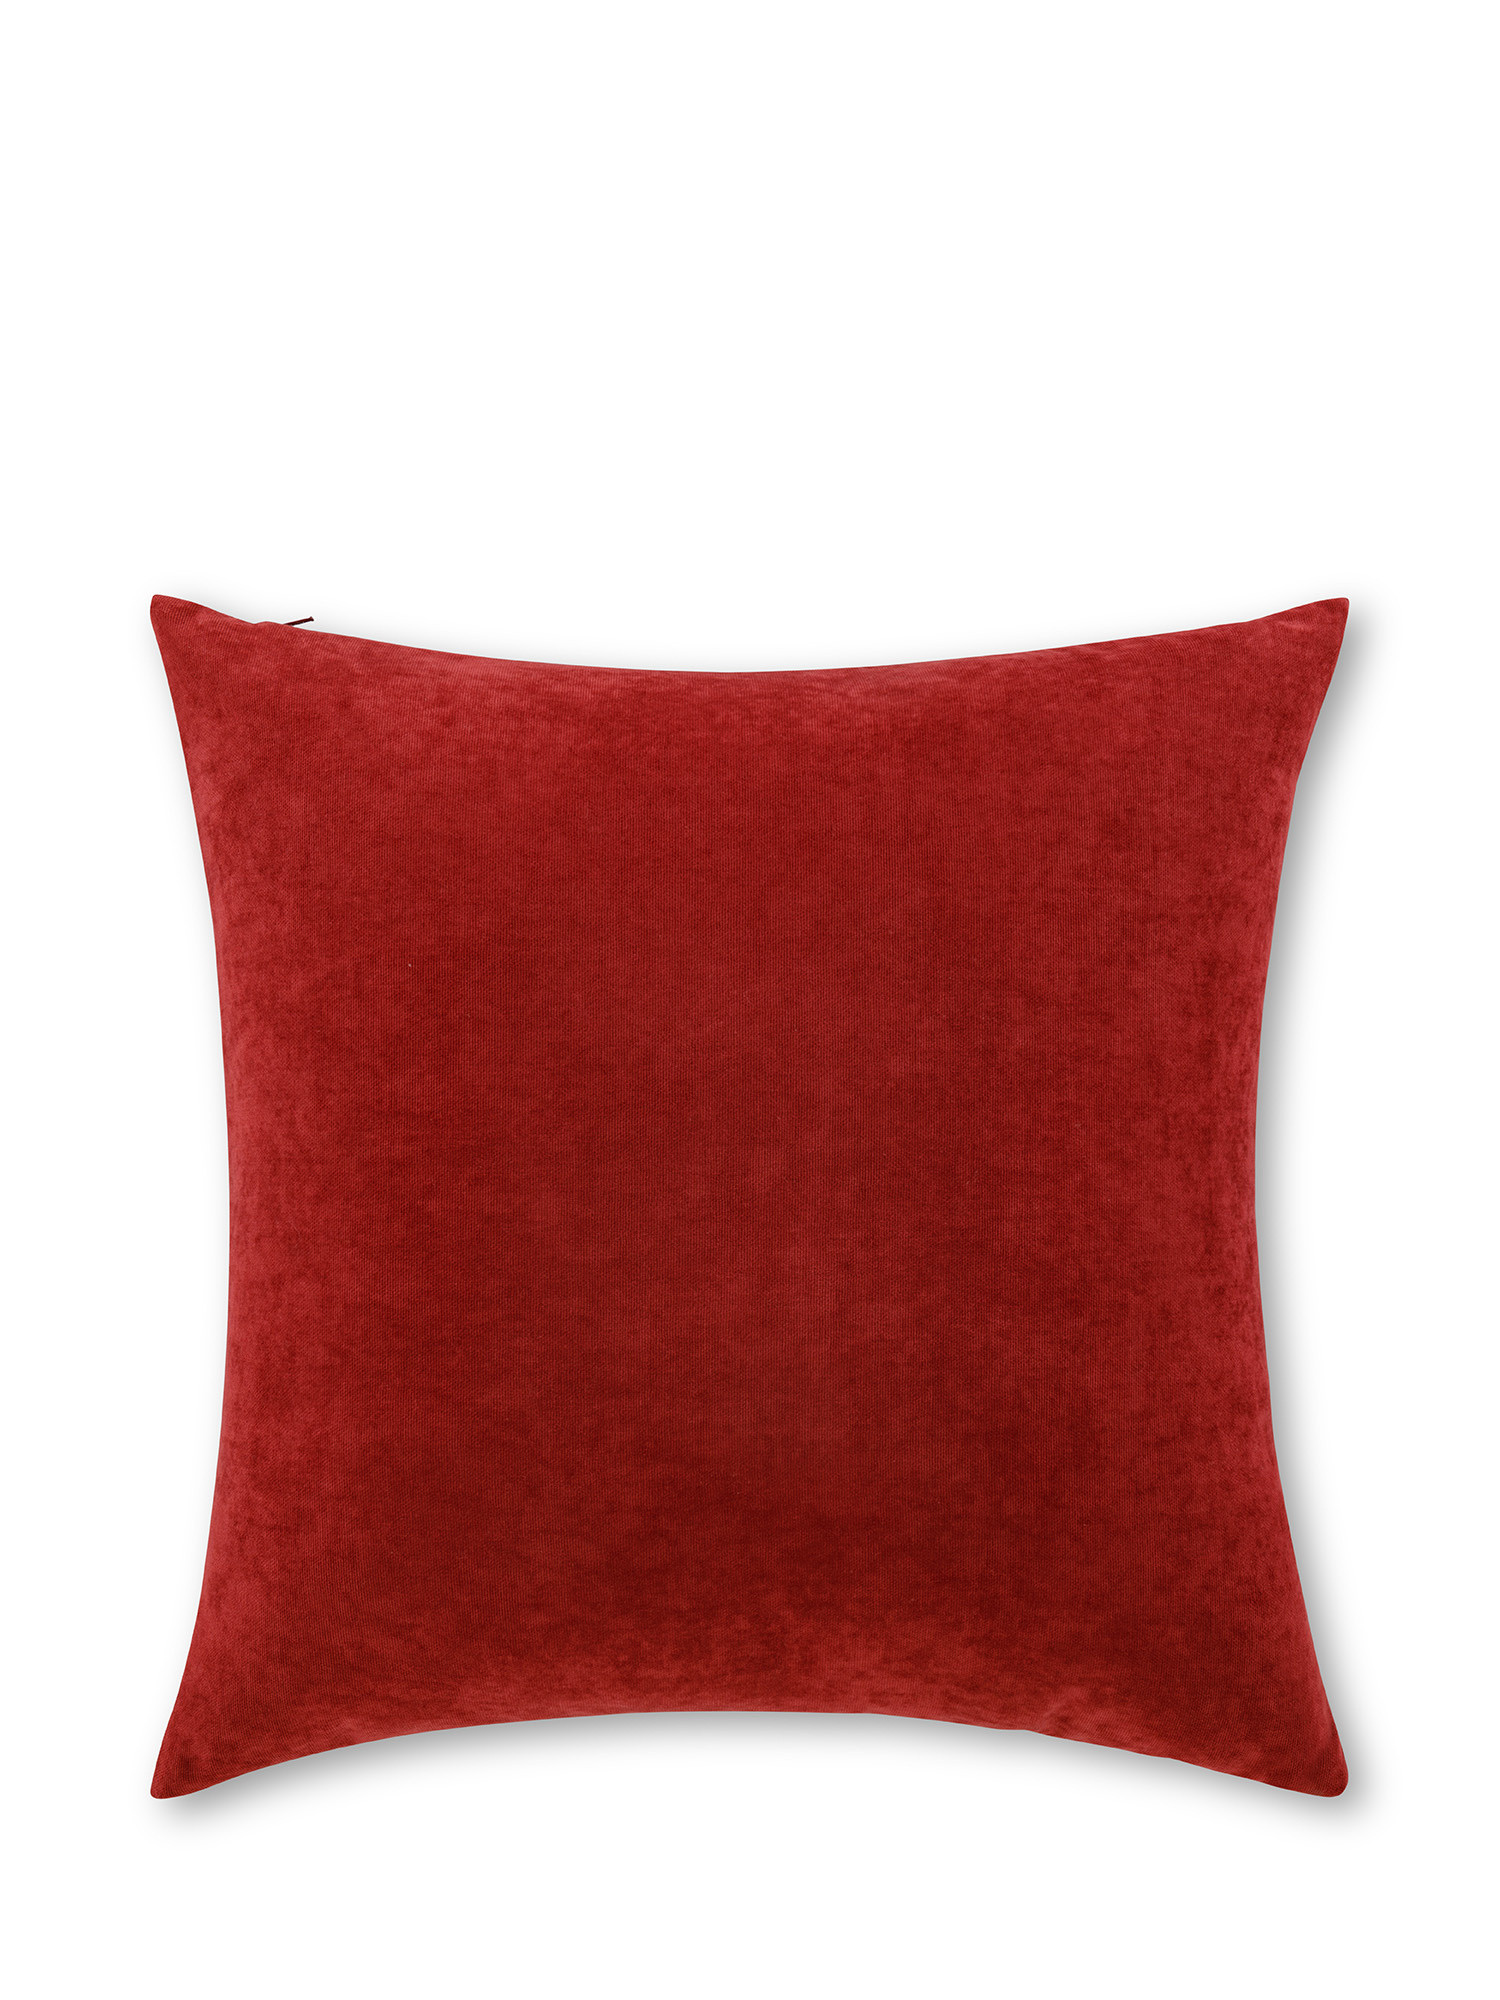 Cushion in jacquard fabric with relief pattern 45x45 cm, Red, large image number 1